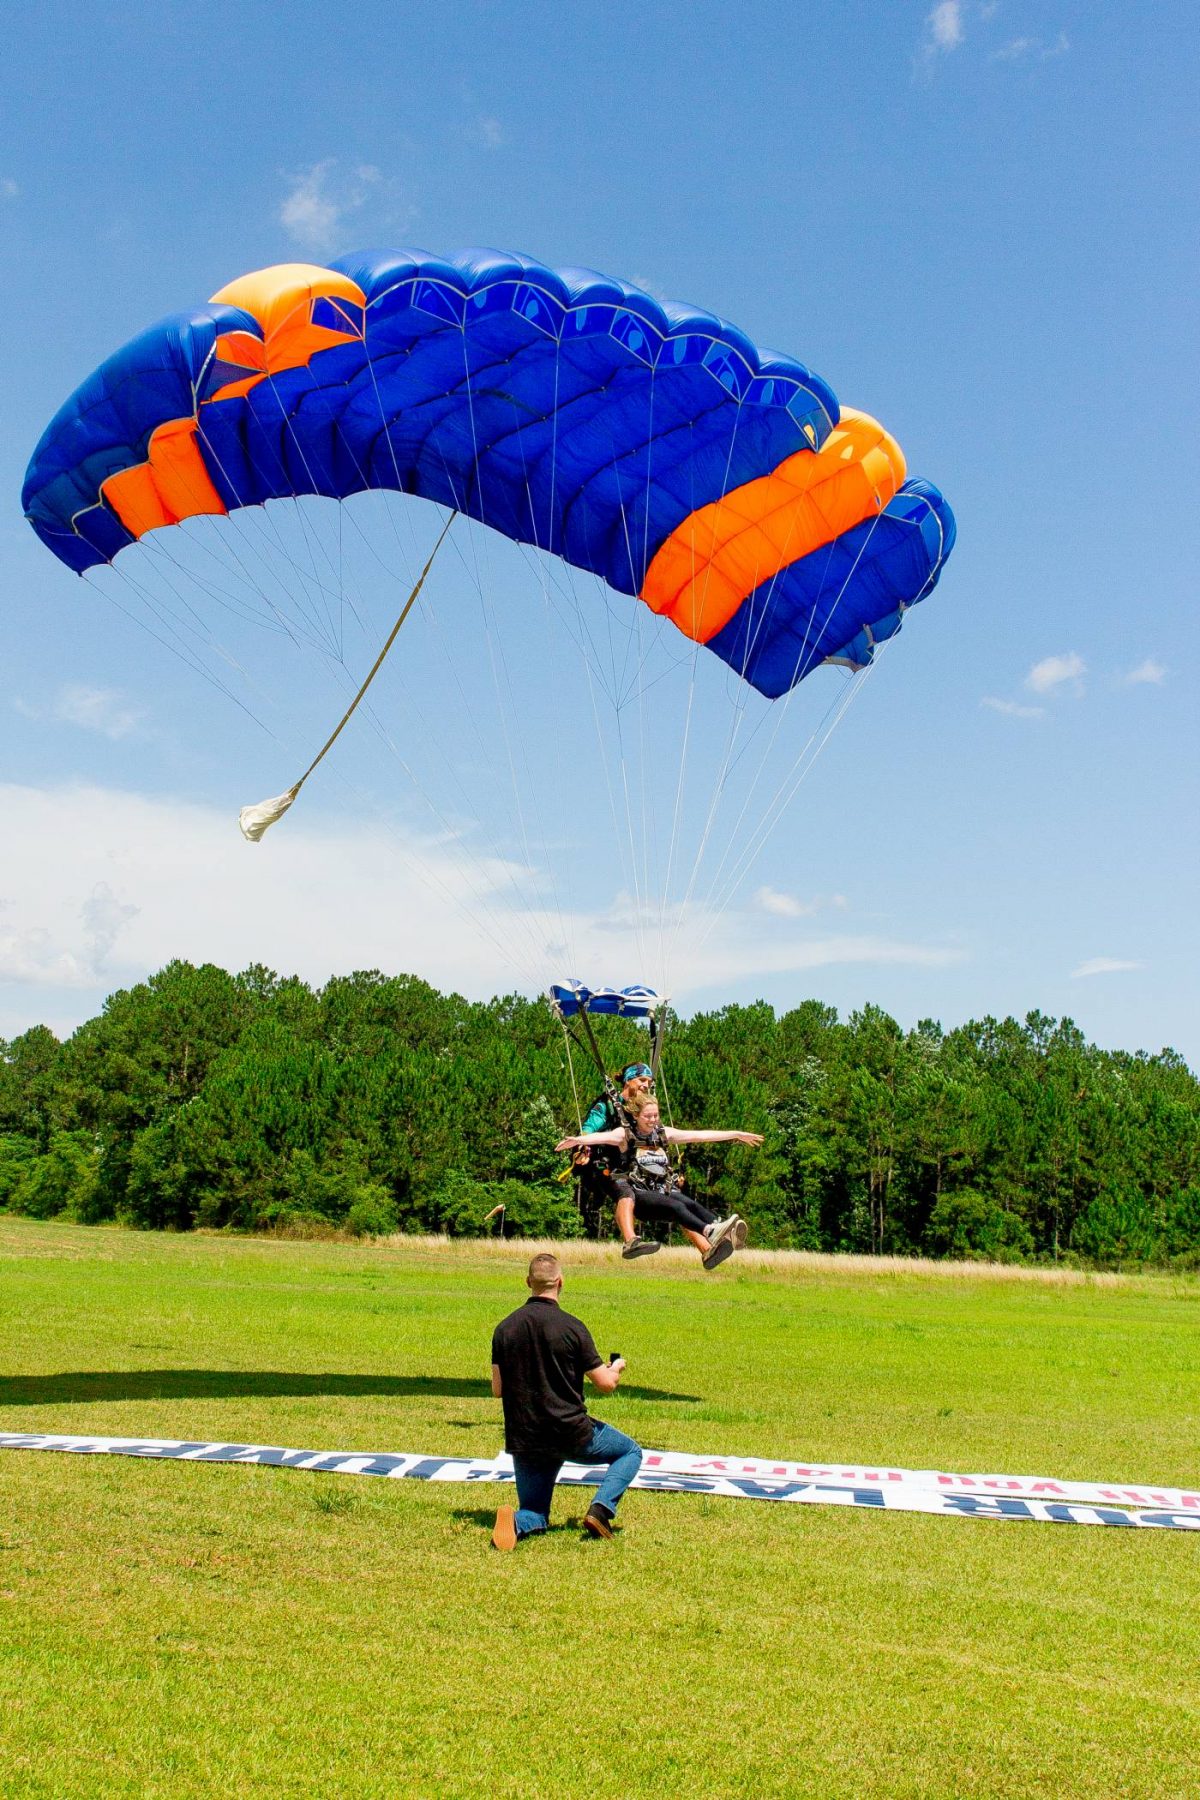 Skydiving Prices Skydiving in Missouri Skydive St. Louis